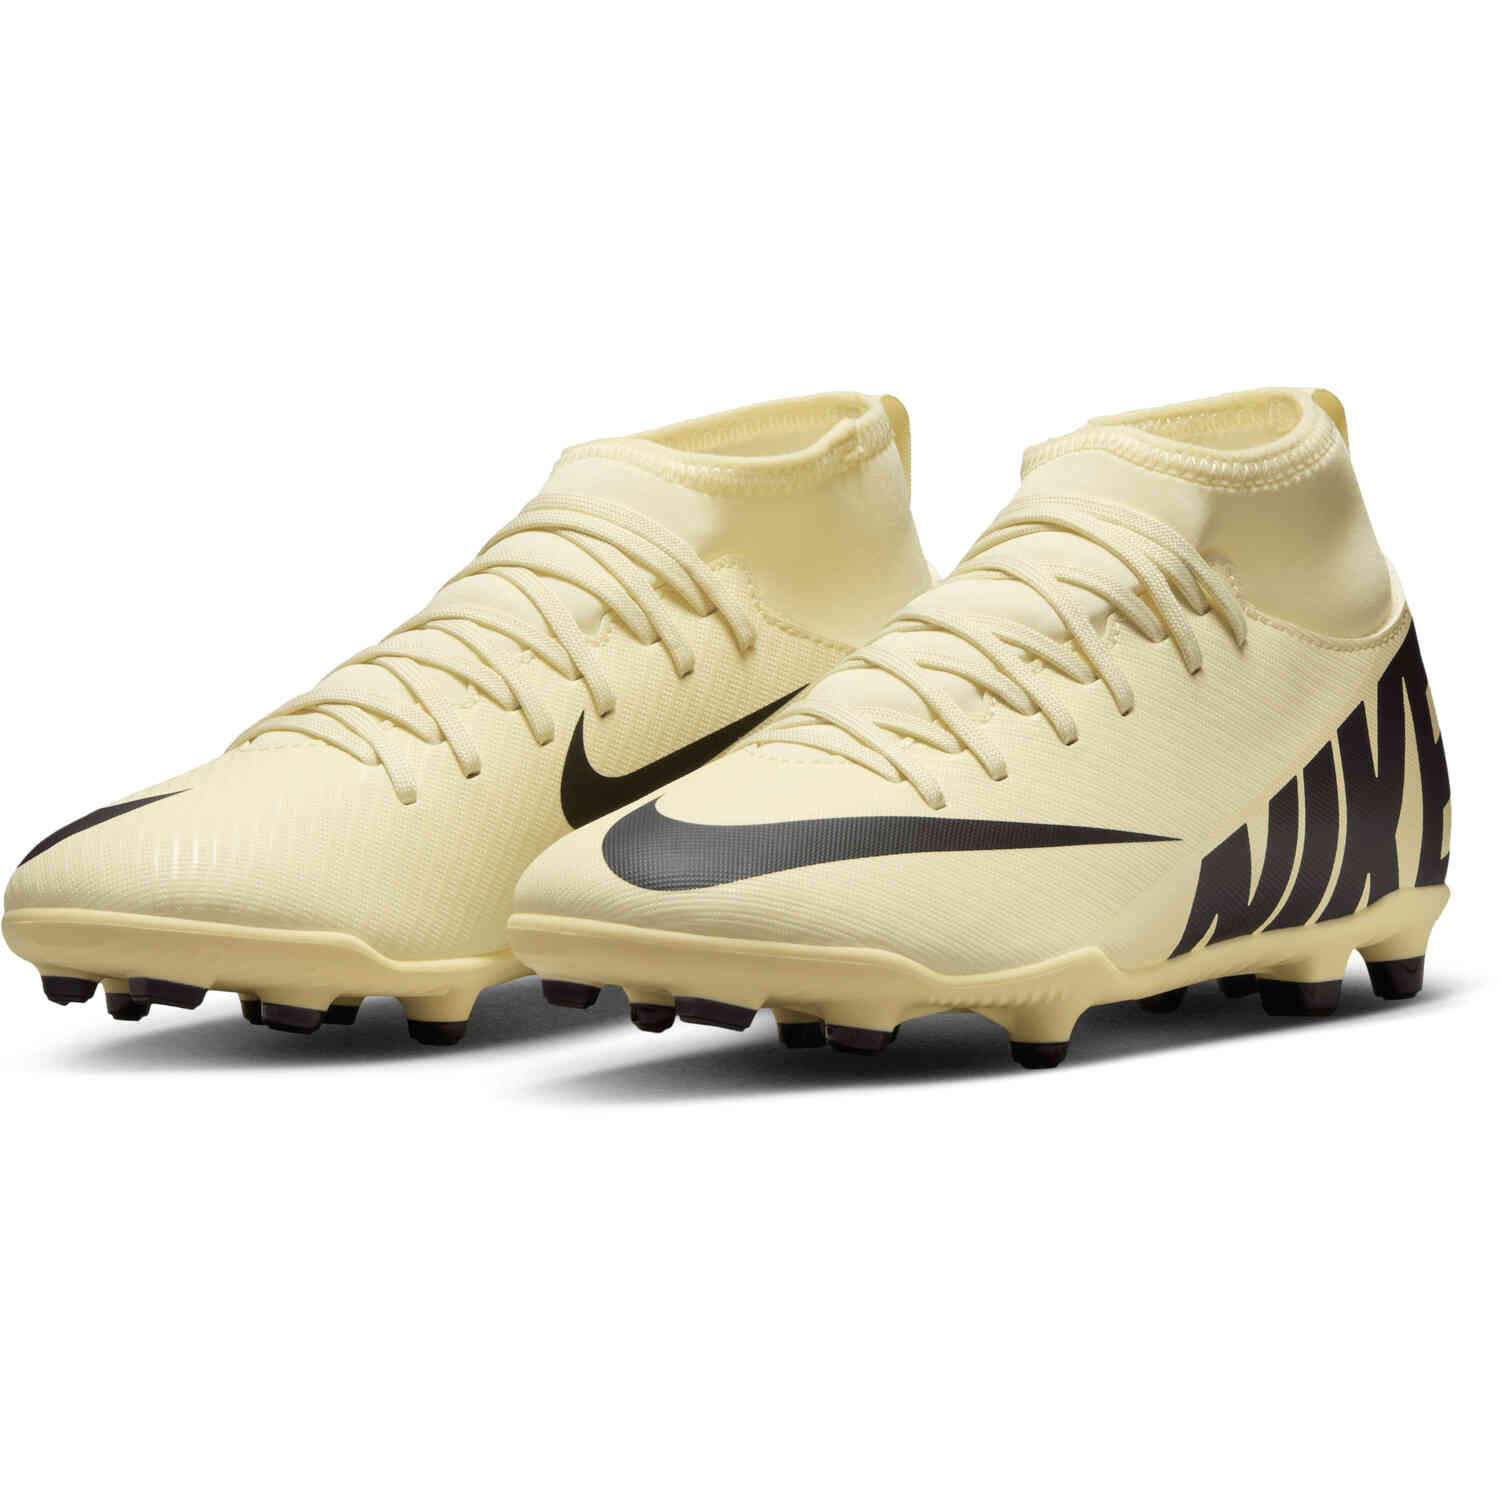 Nike Mercurial Superfly Soccer Shoes & Cleats | SoccerMaster.com